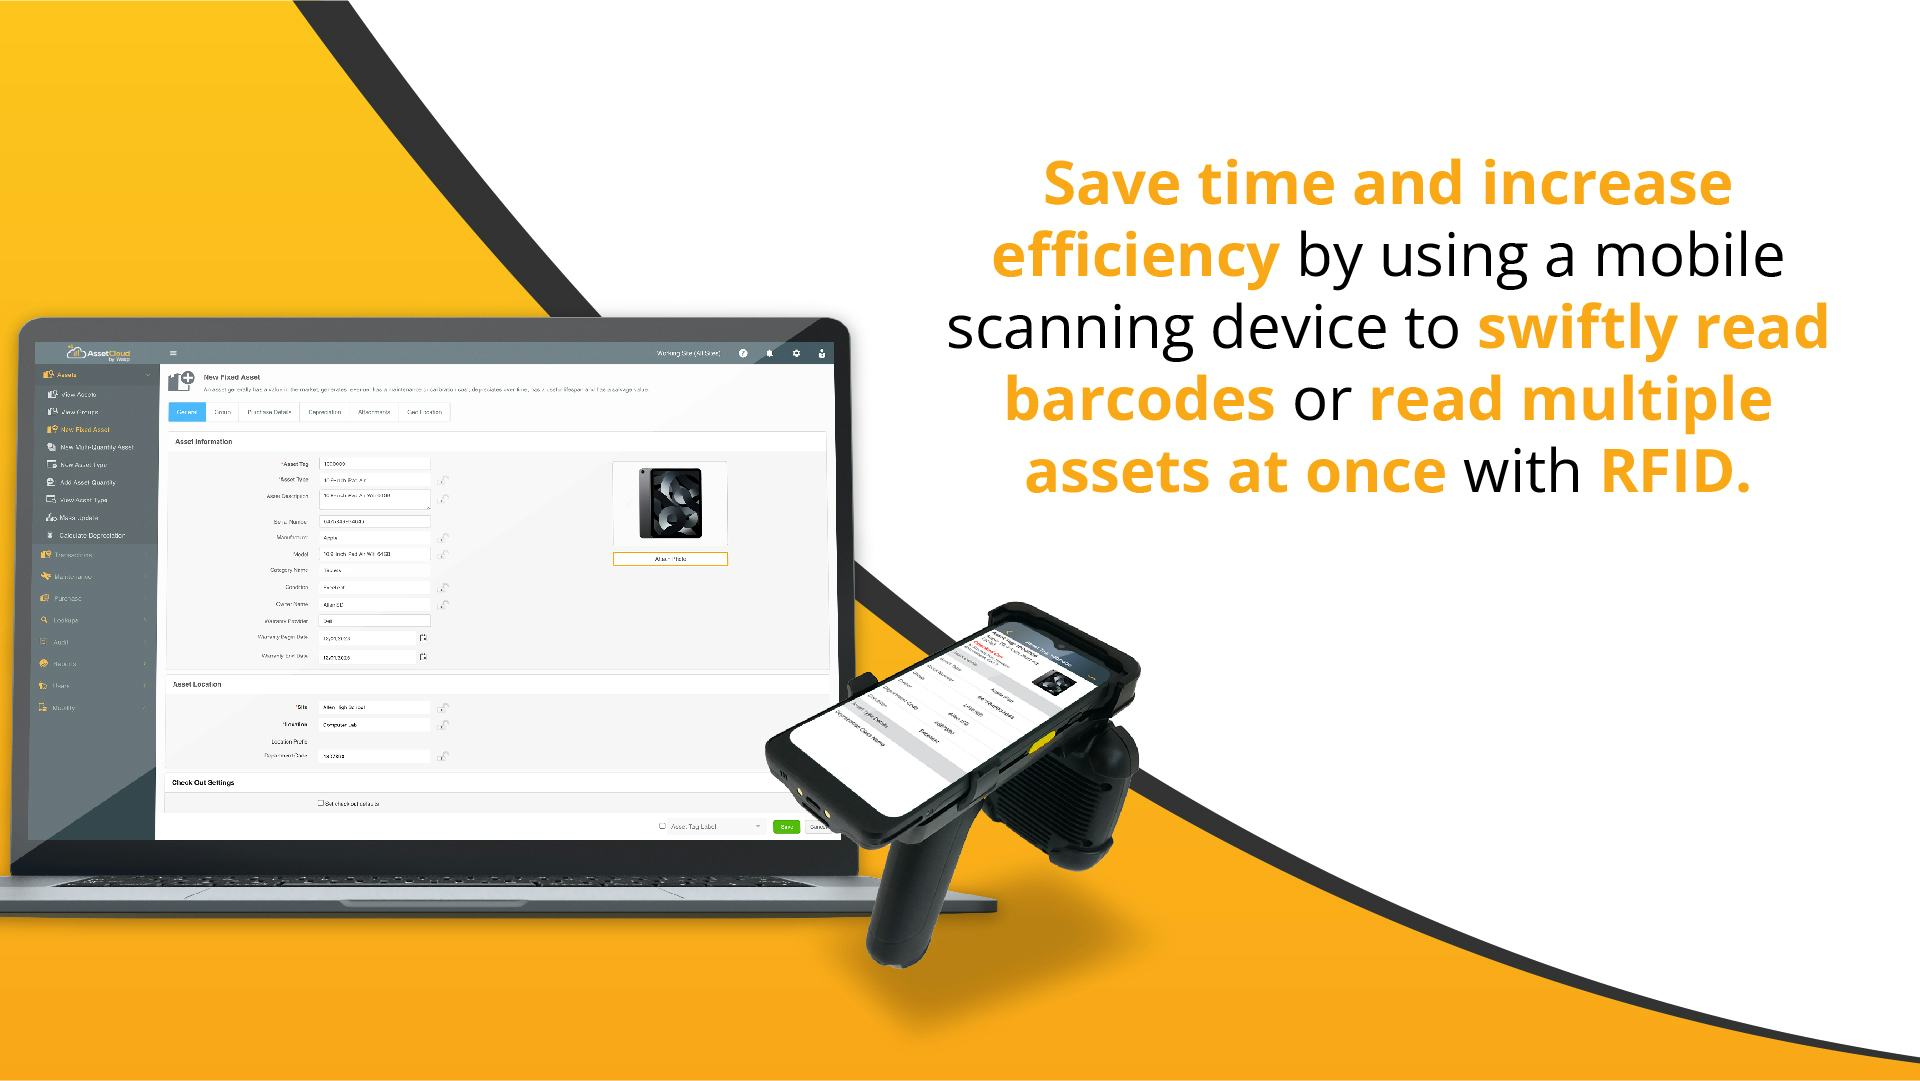 AssetCloud Software - Save time and increase efficiency by using a mobile scanning device to swiftly read barcodes or read multiple assets at once with RFID